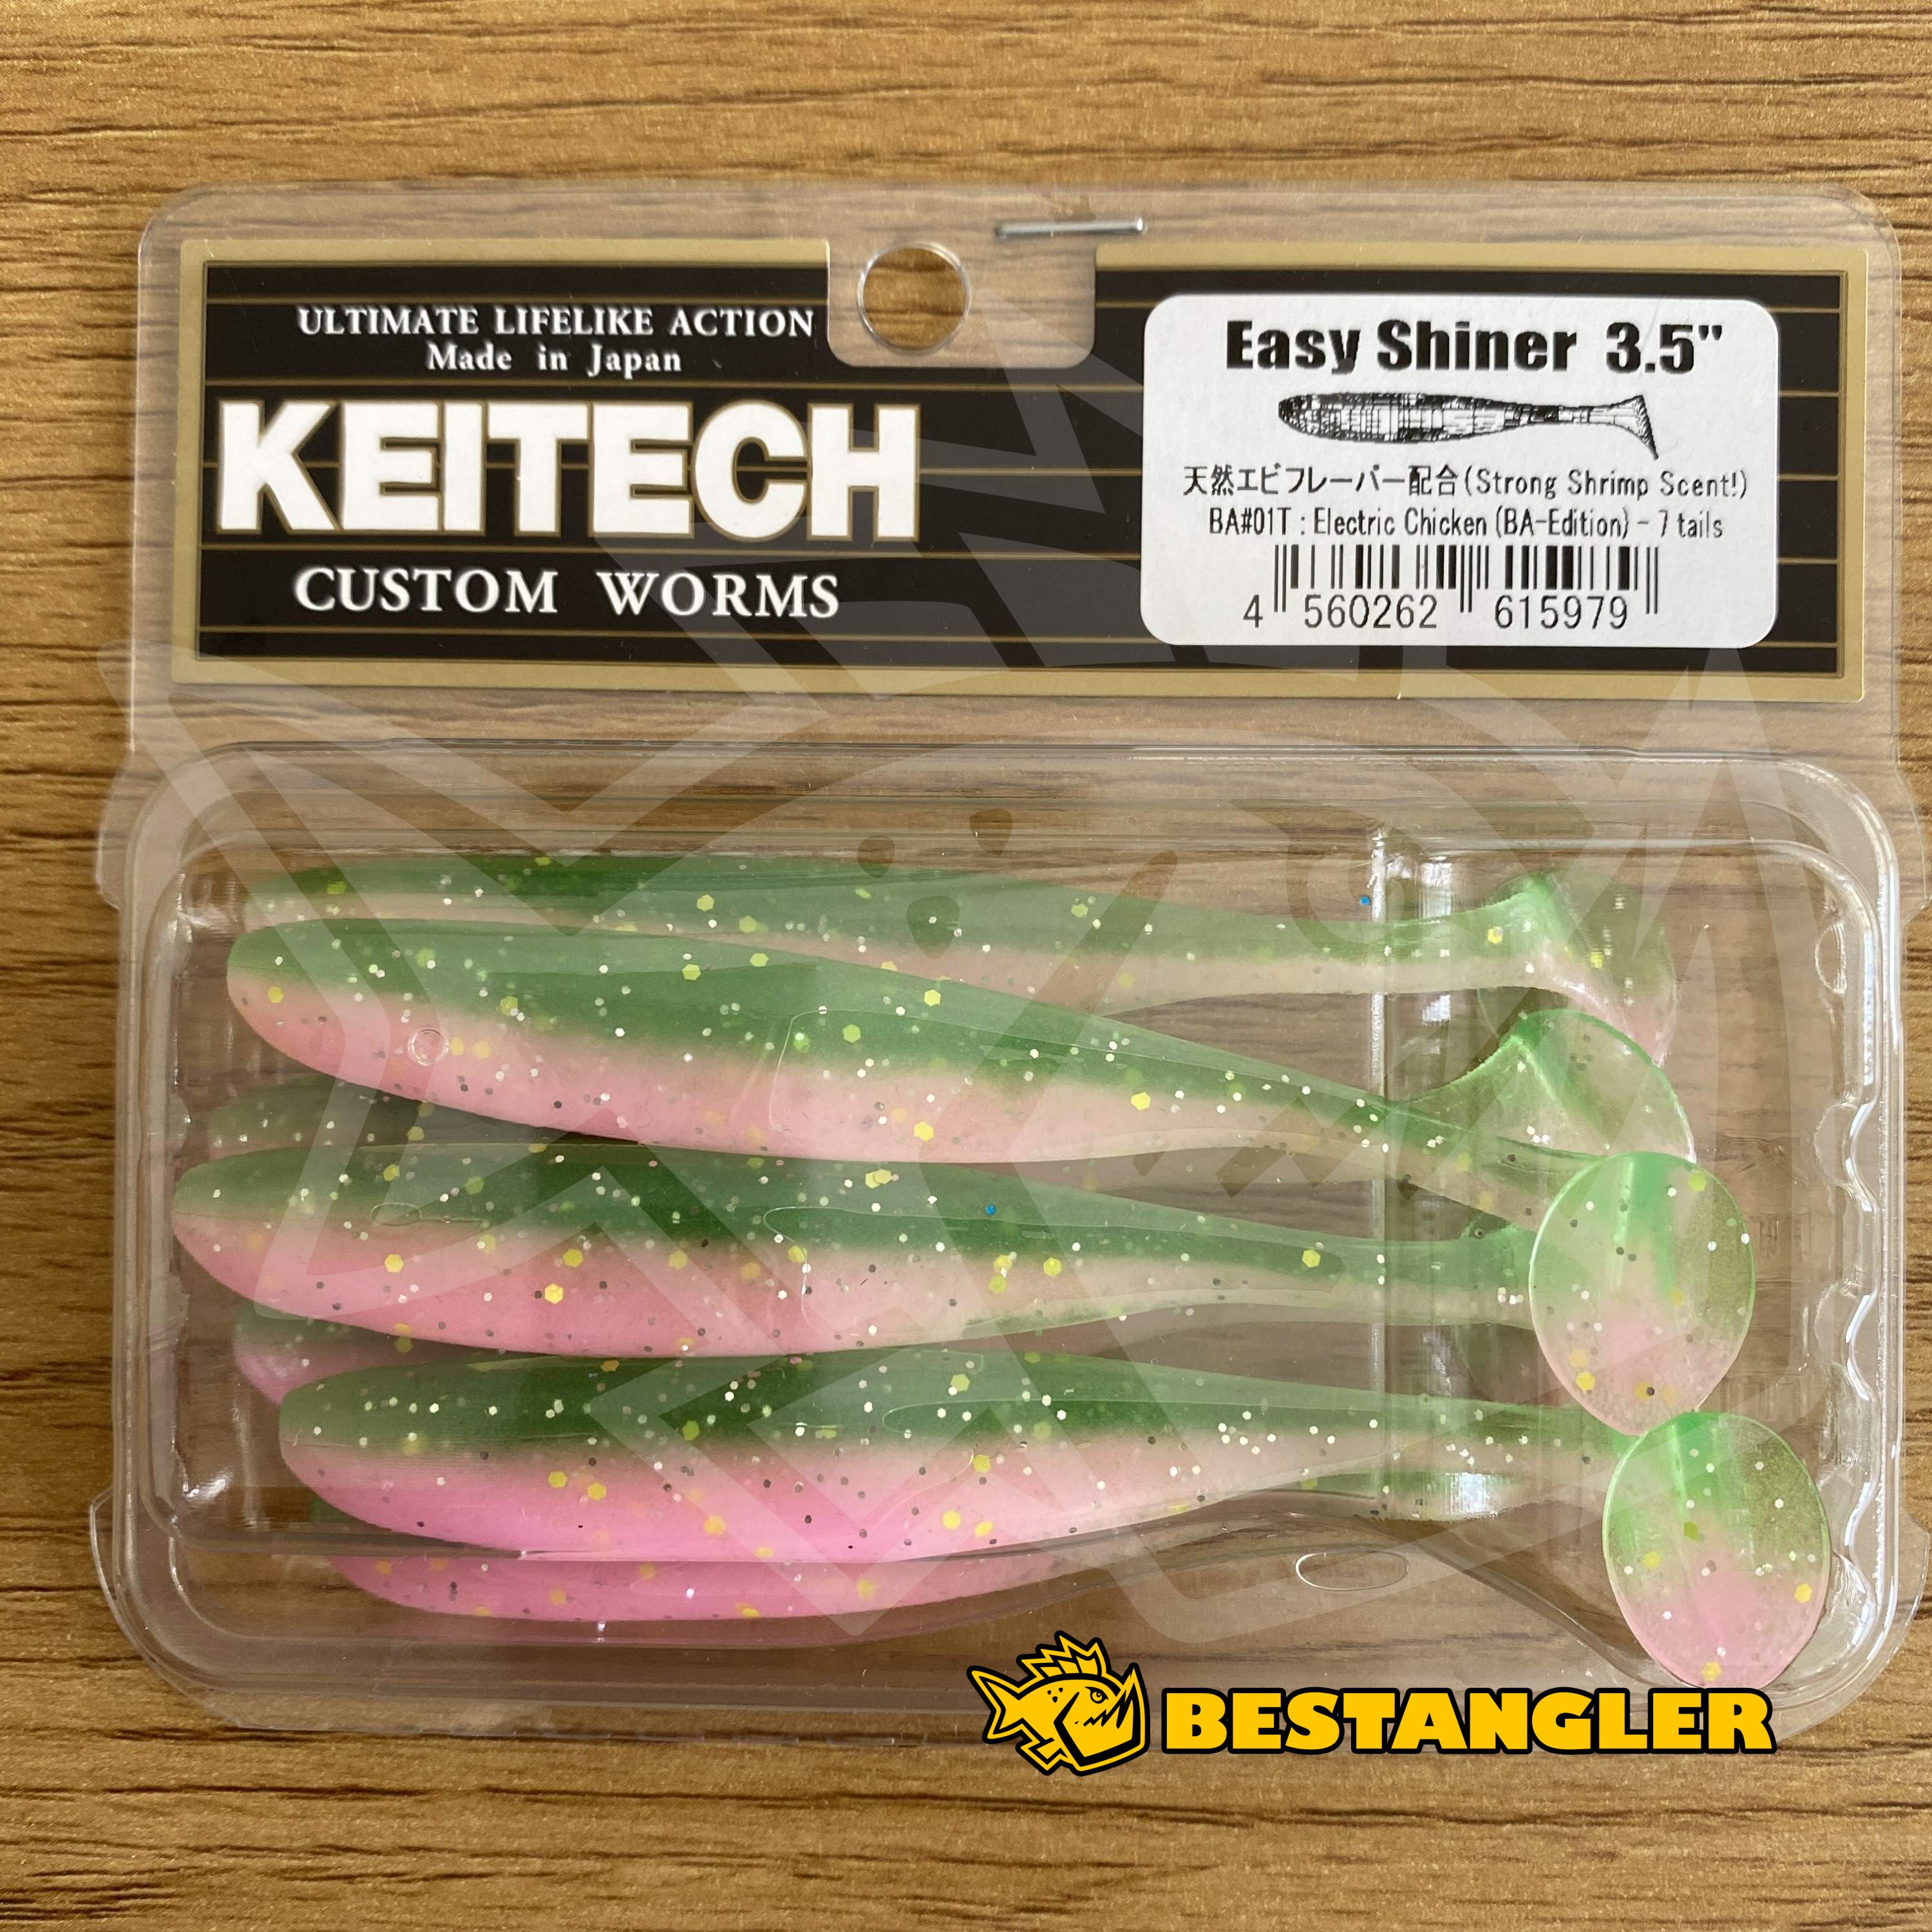 Keitech Easy Shiner 3.5 Electric Chicken